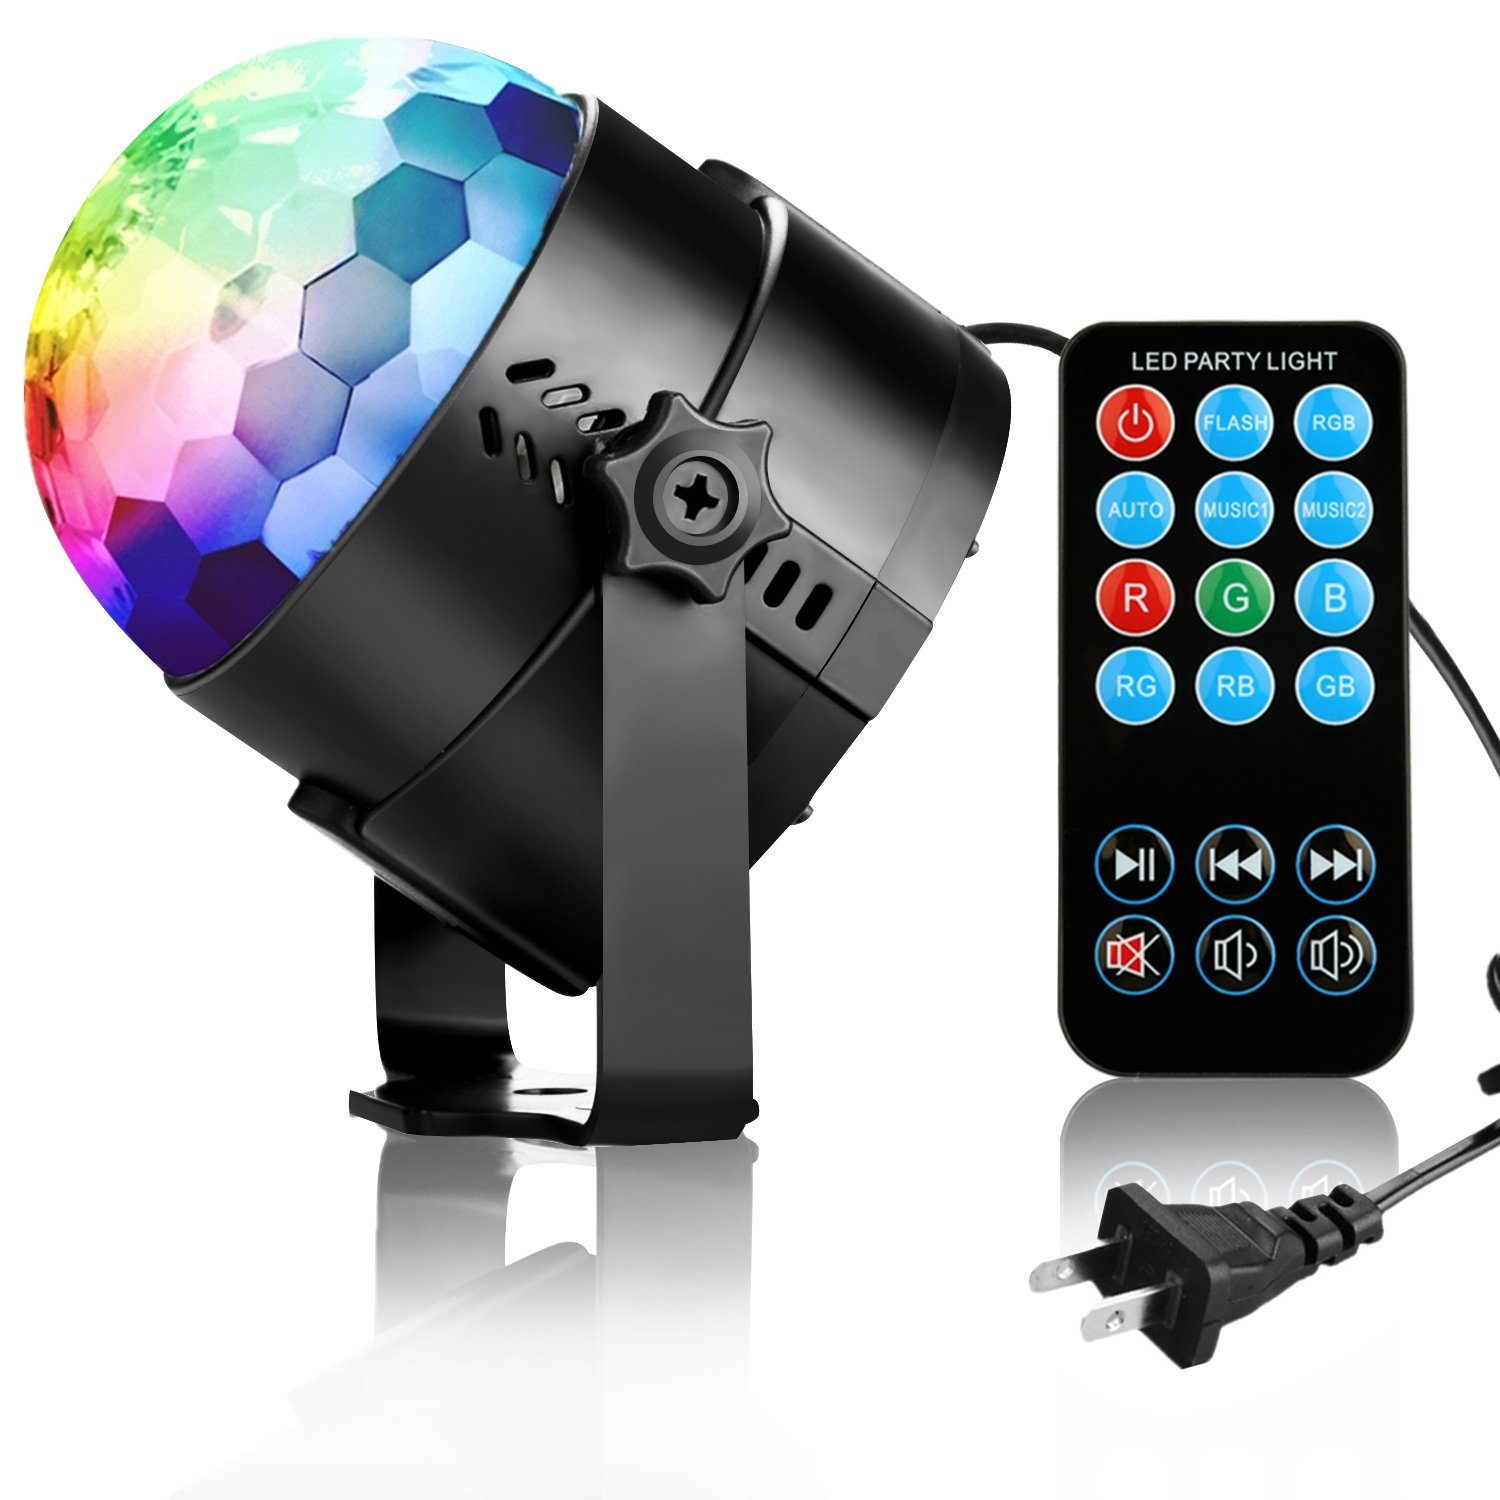 with Remote Miuko Disco Ball 3W USB Strobe LED Party Light Portable 7 Colors Sound Activated Dance Light Stage DJ Lights for Festival Bar Club Party in Car or Outdoor 